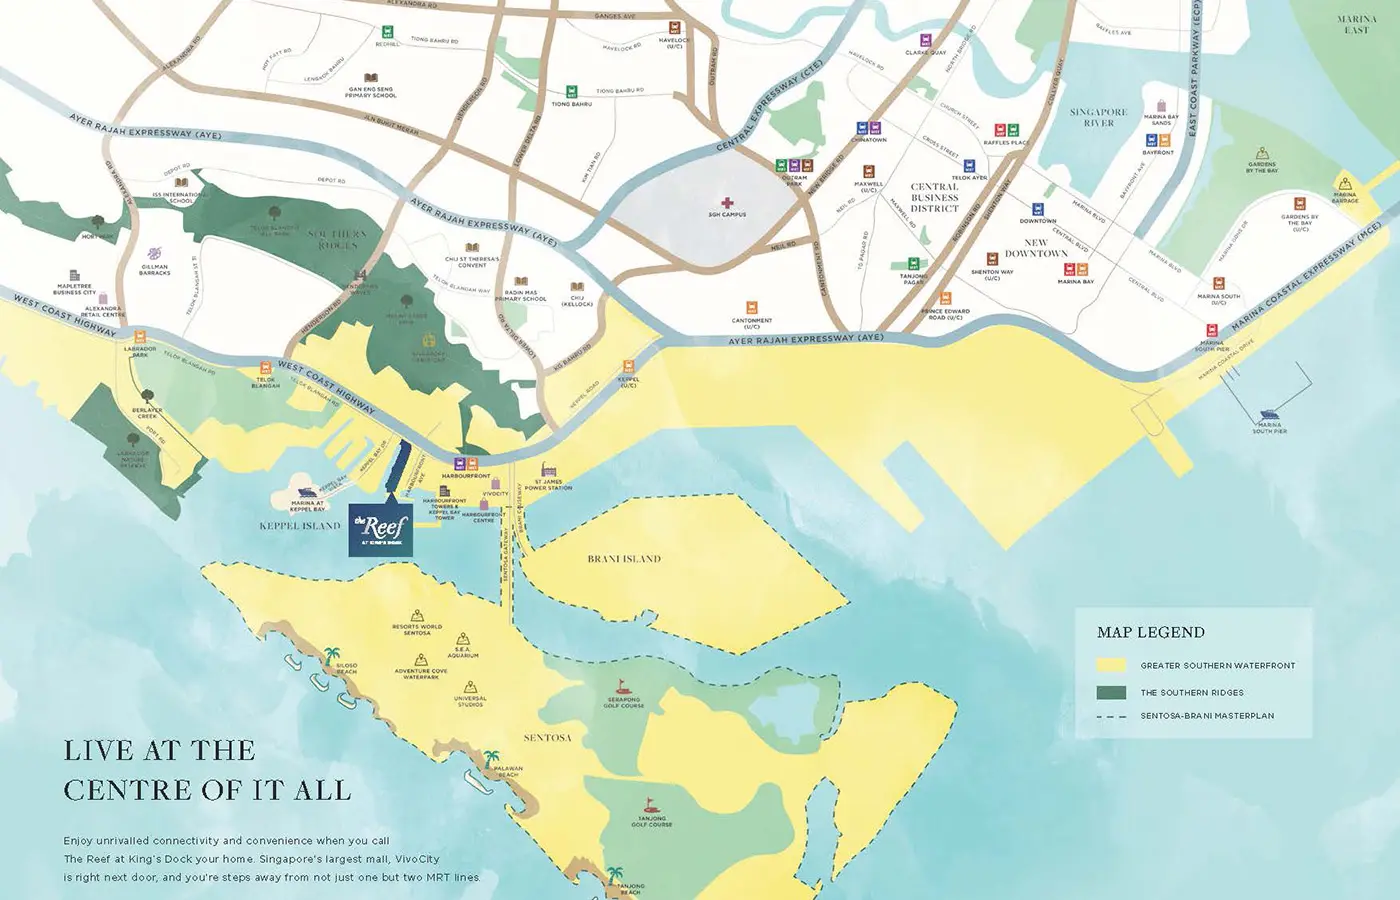 The Reef at King's Dock Condo Location - Location Map